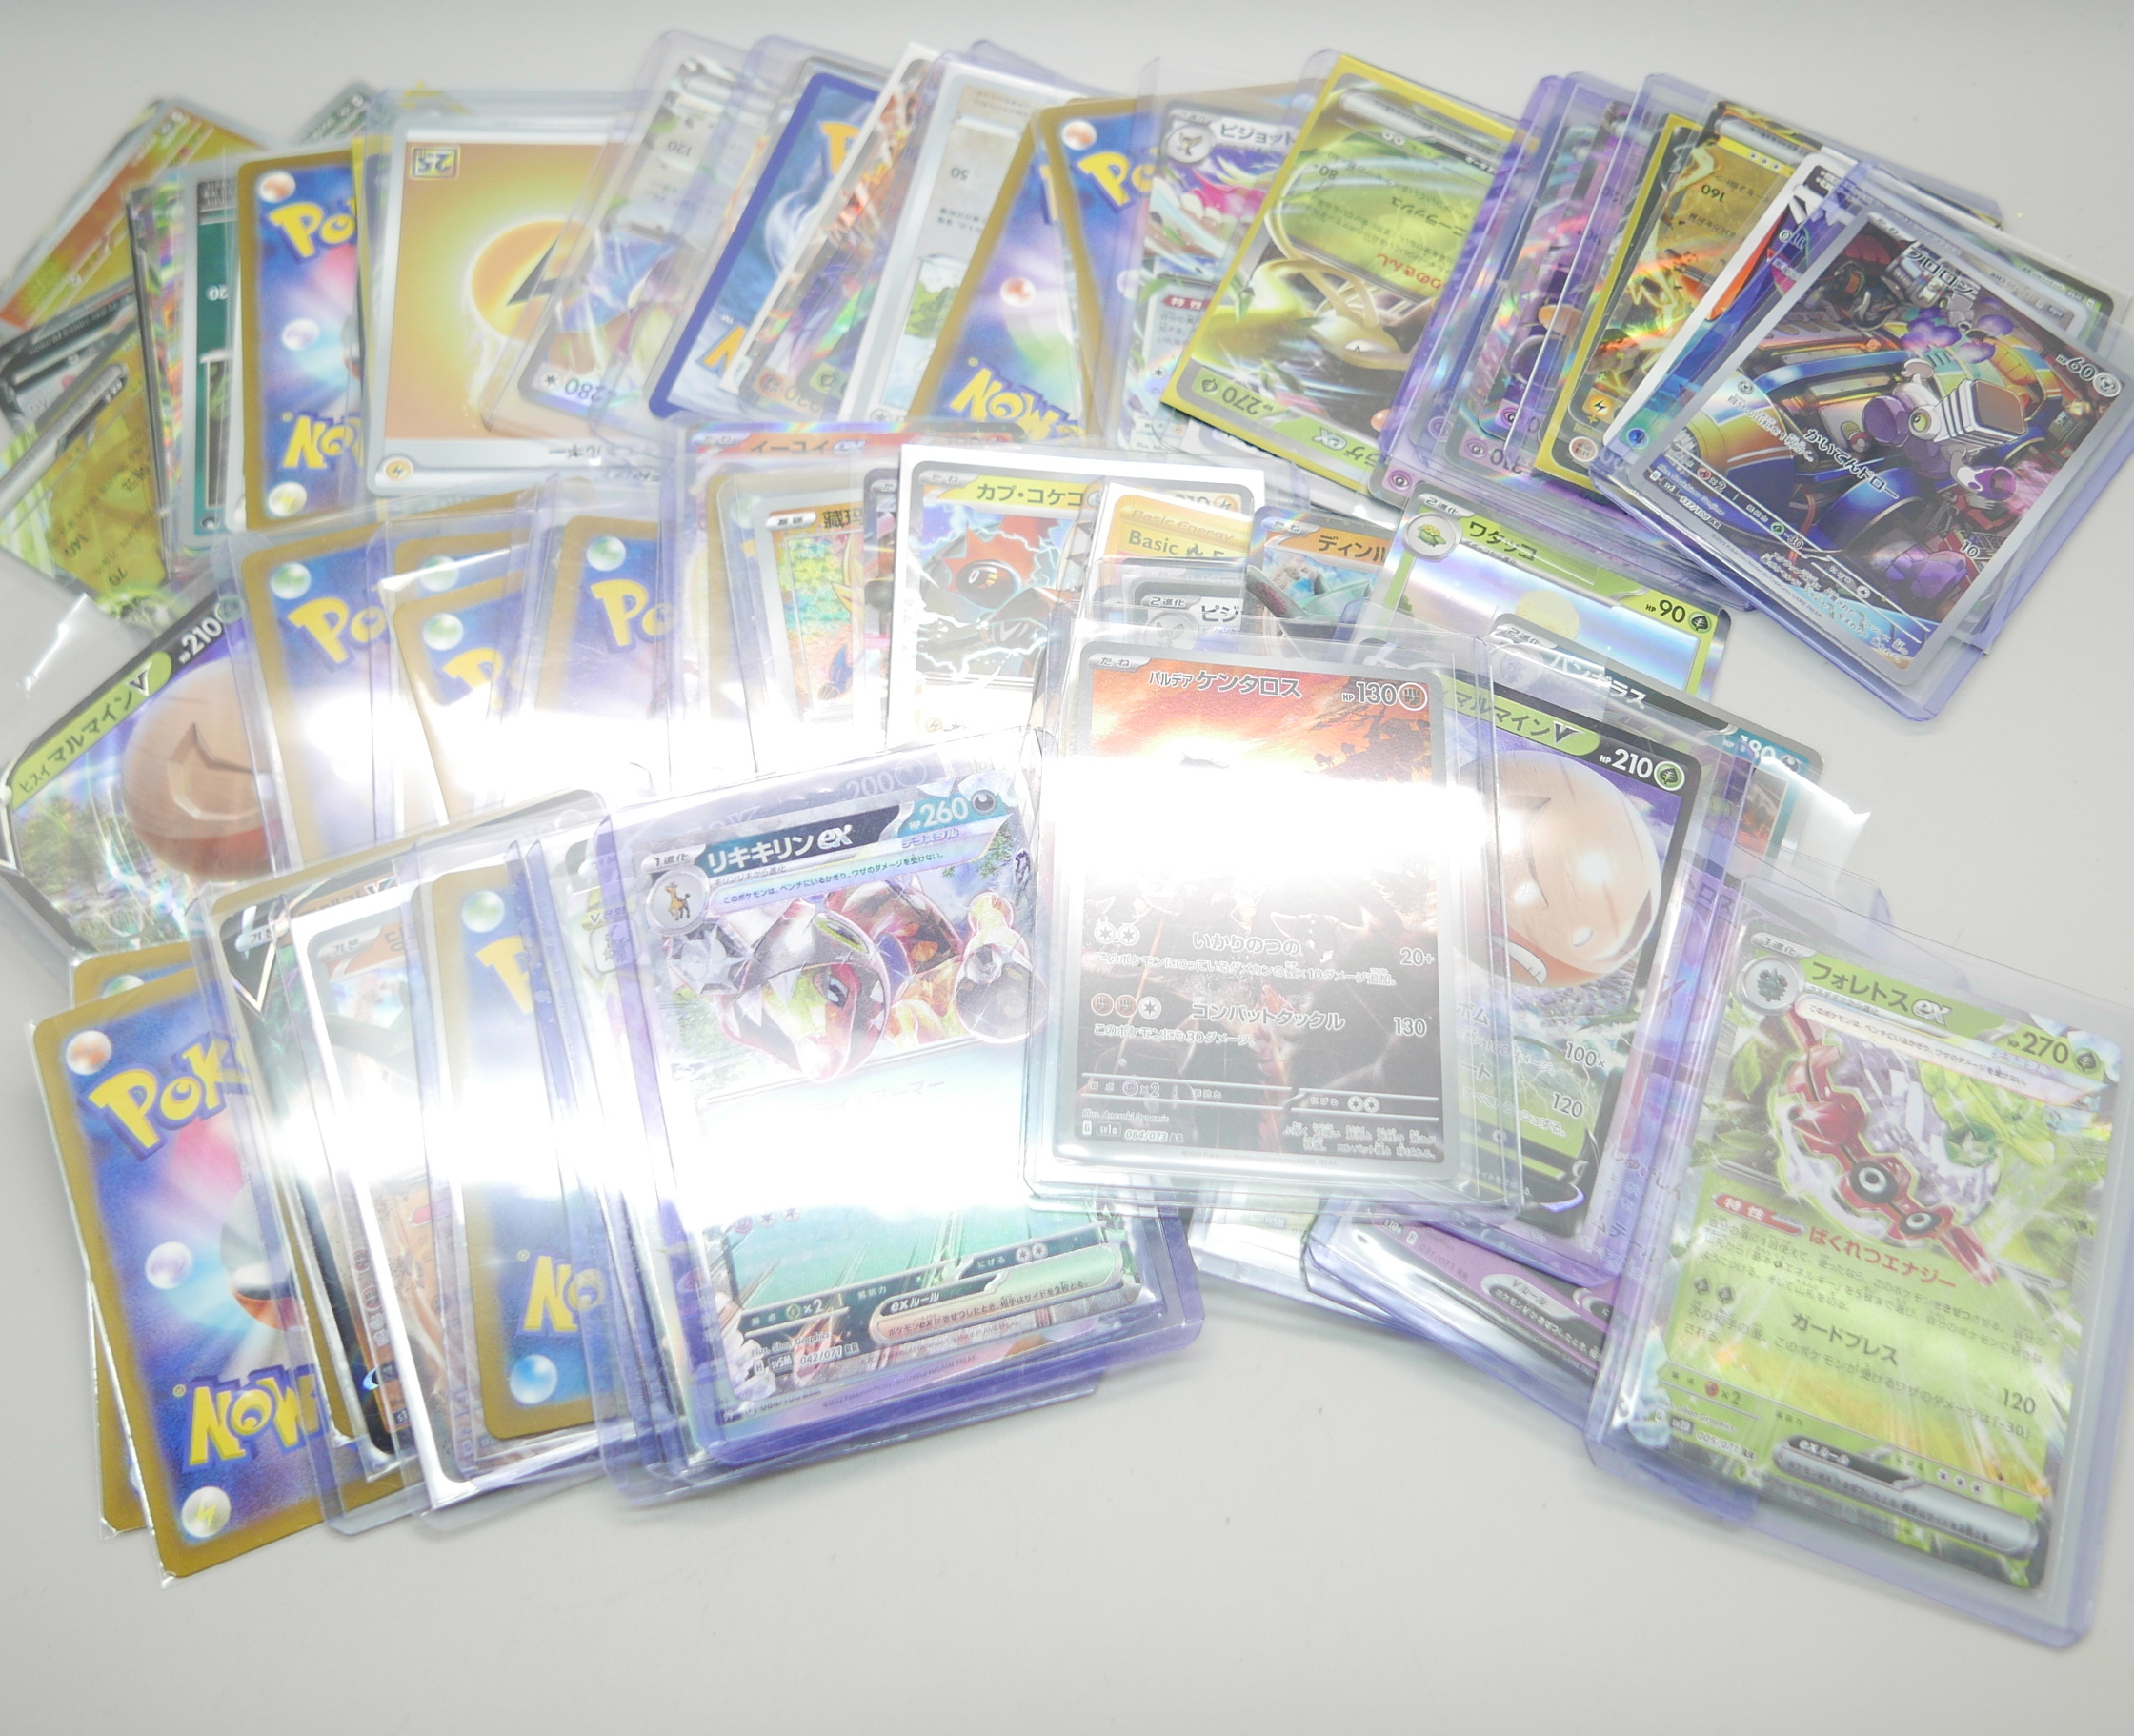 A collection of approximately 95 Pokemon cards